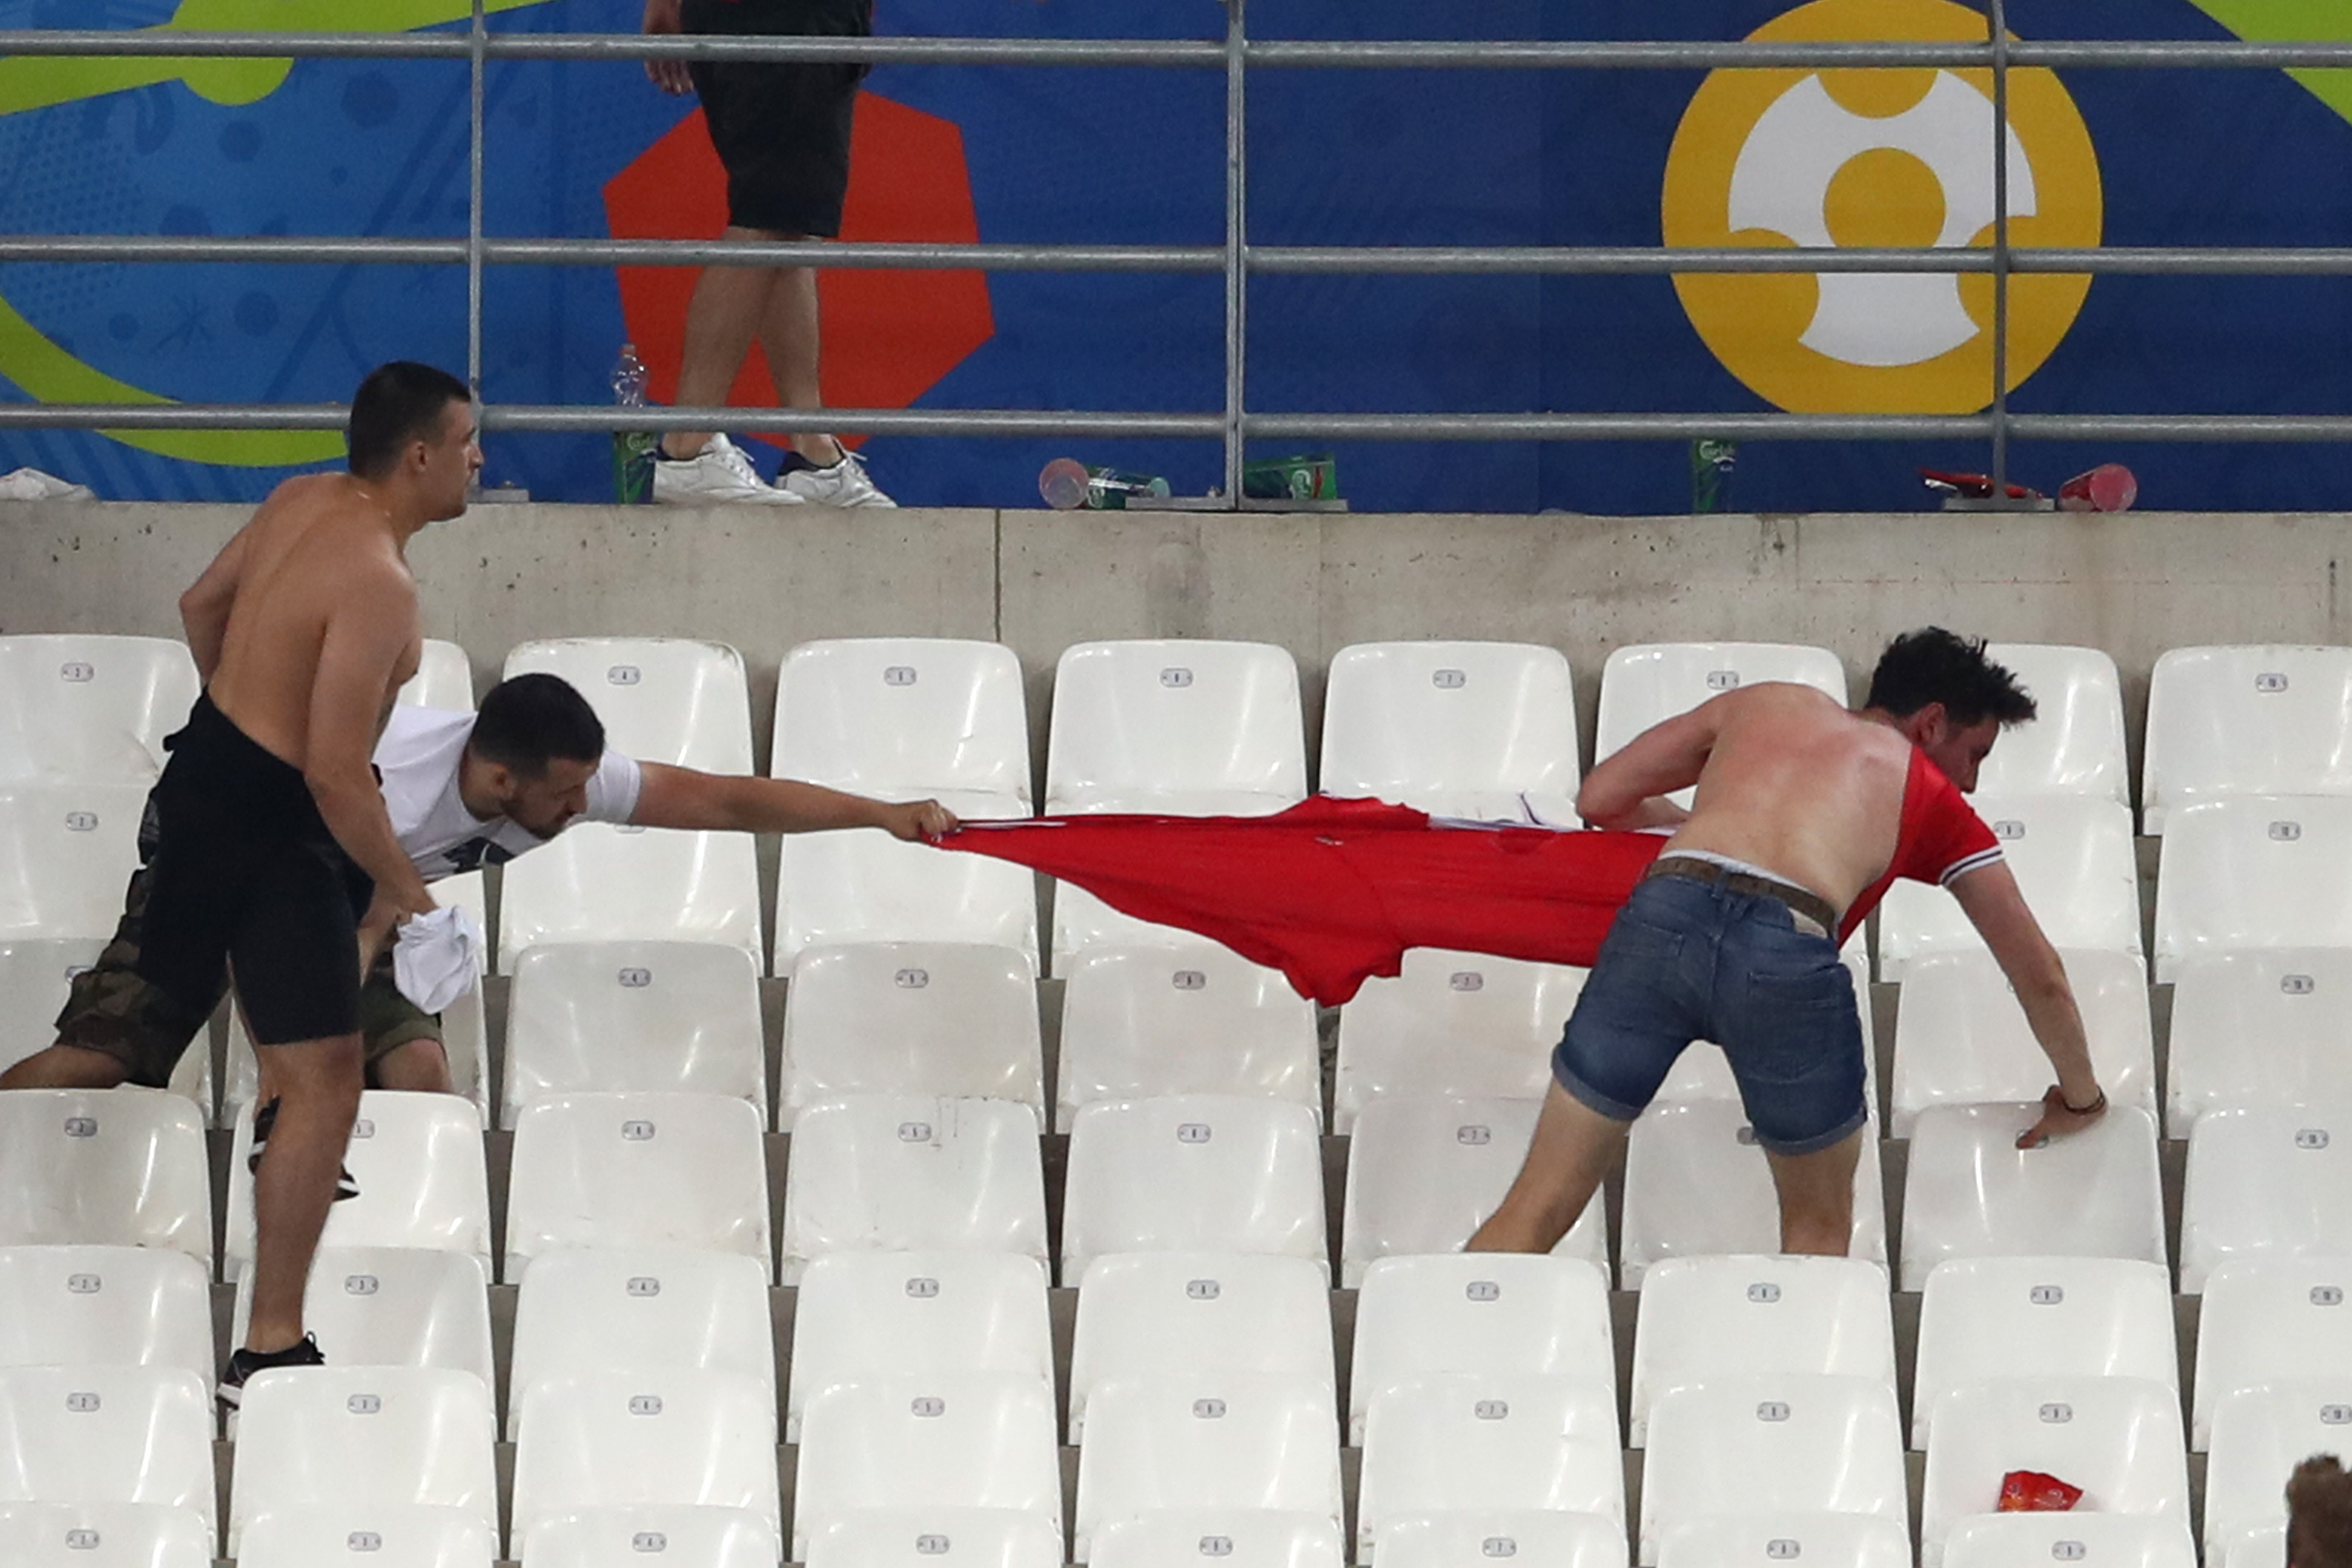 UEFA : Russia to be suspended from Euro 2016 if fans cause anymore disturbances in stadium